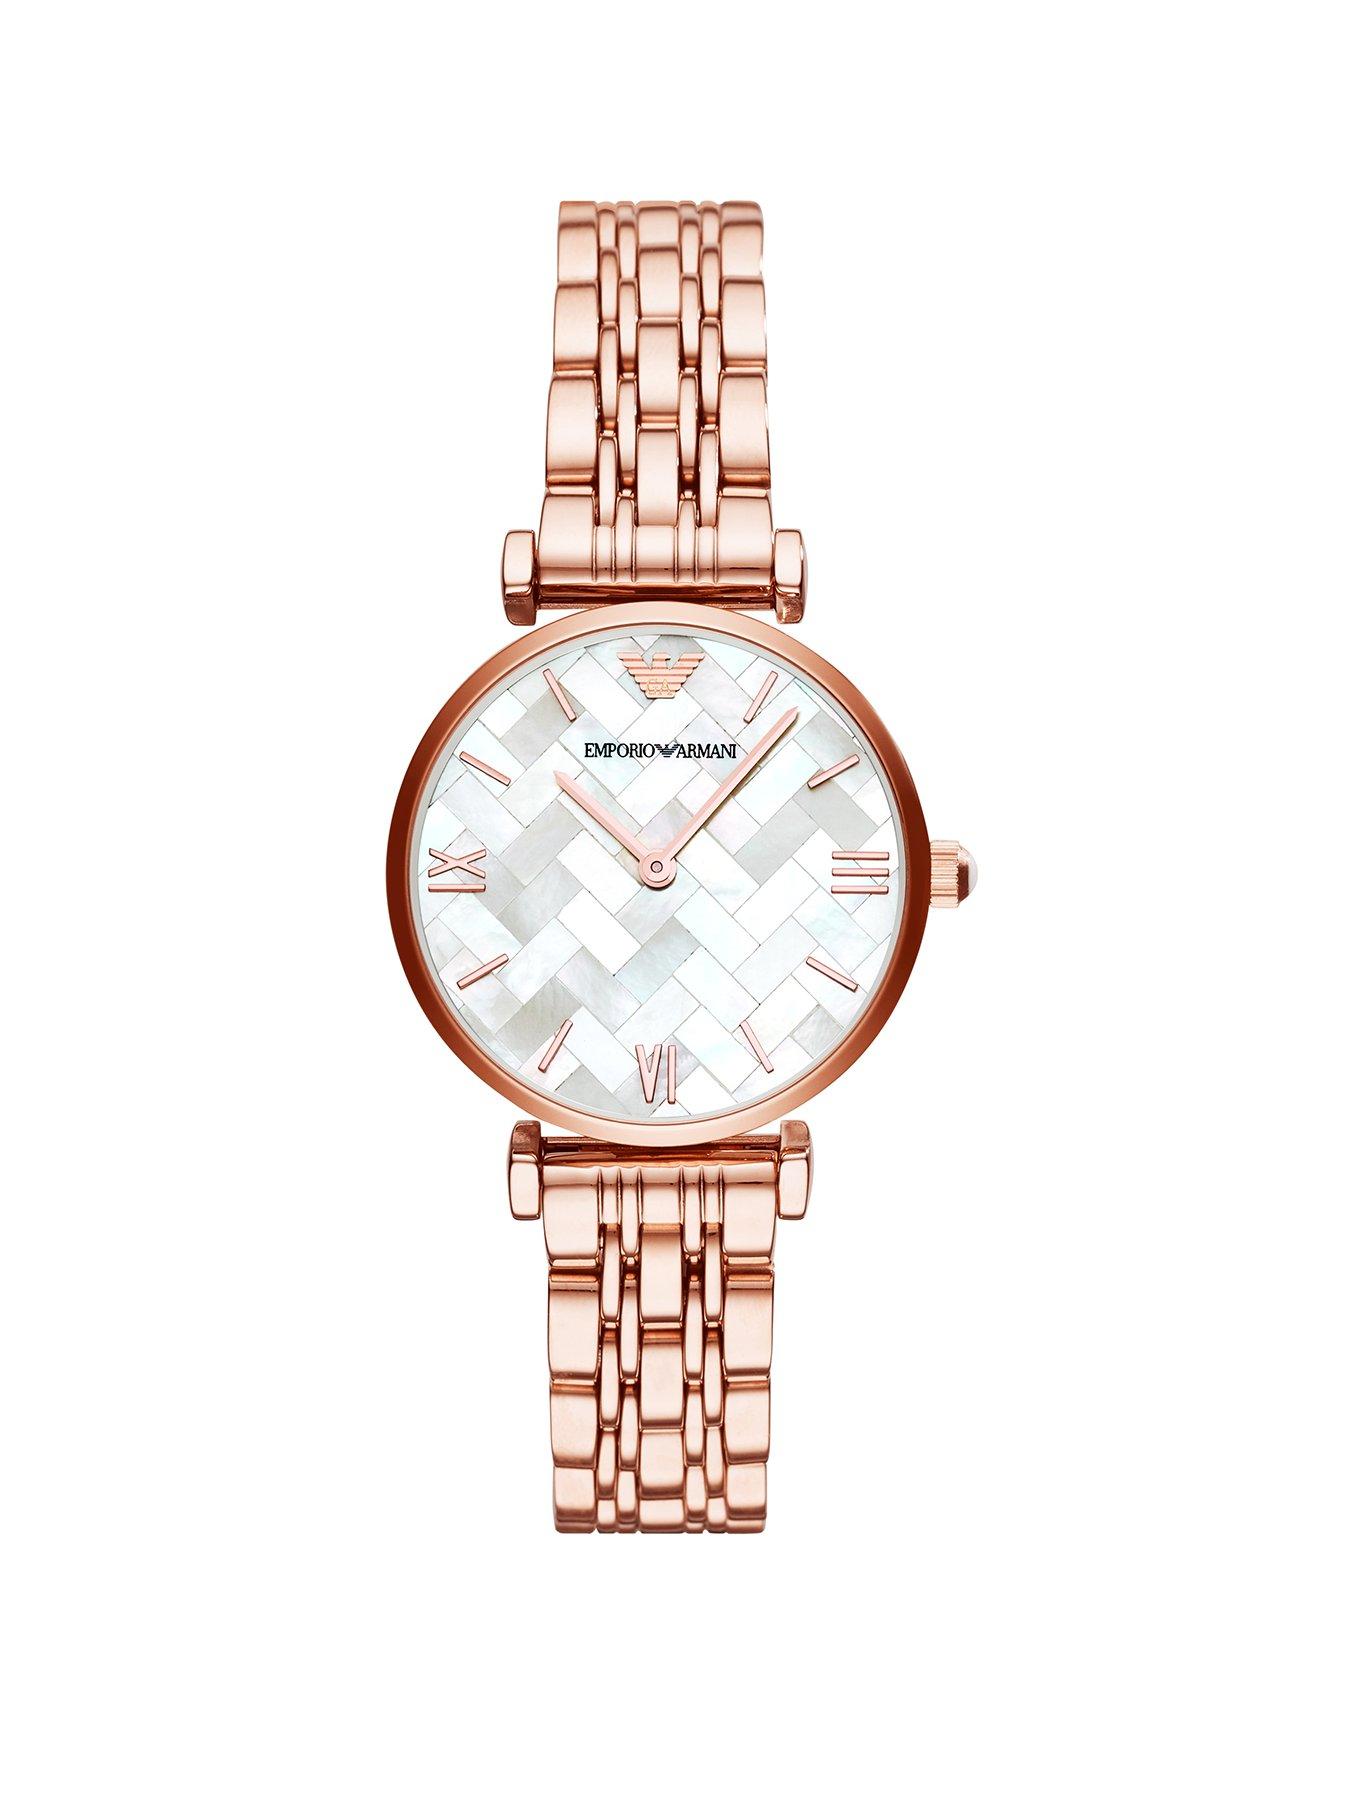 white and gold armani watch